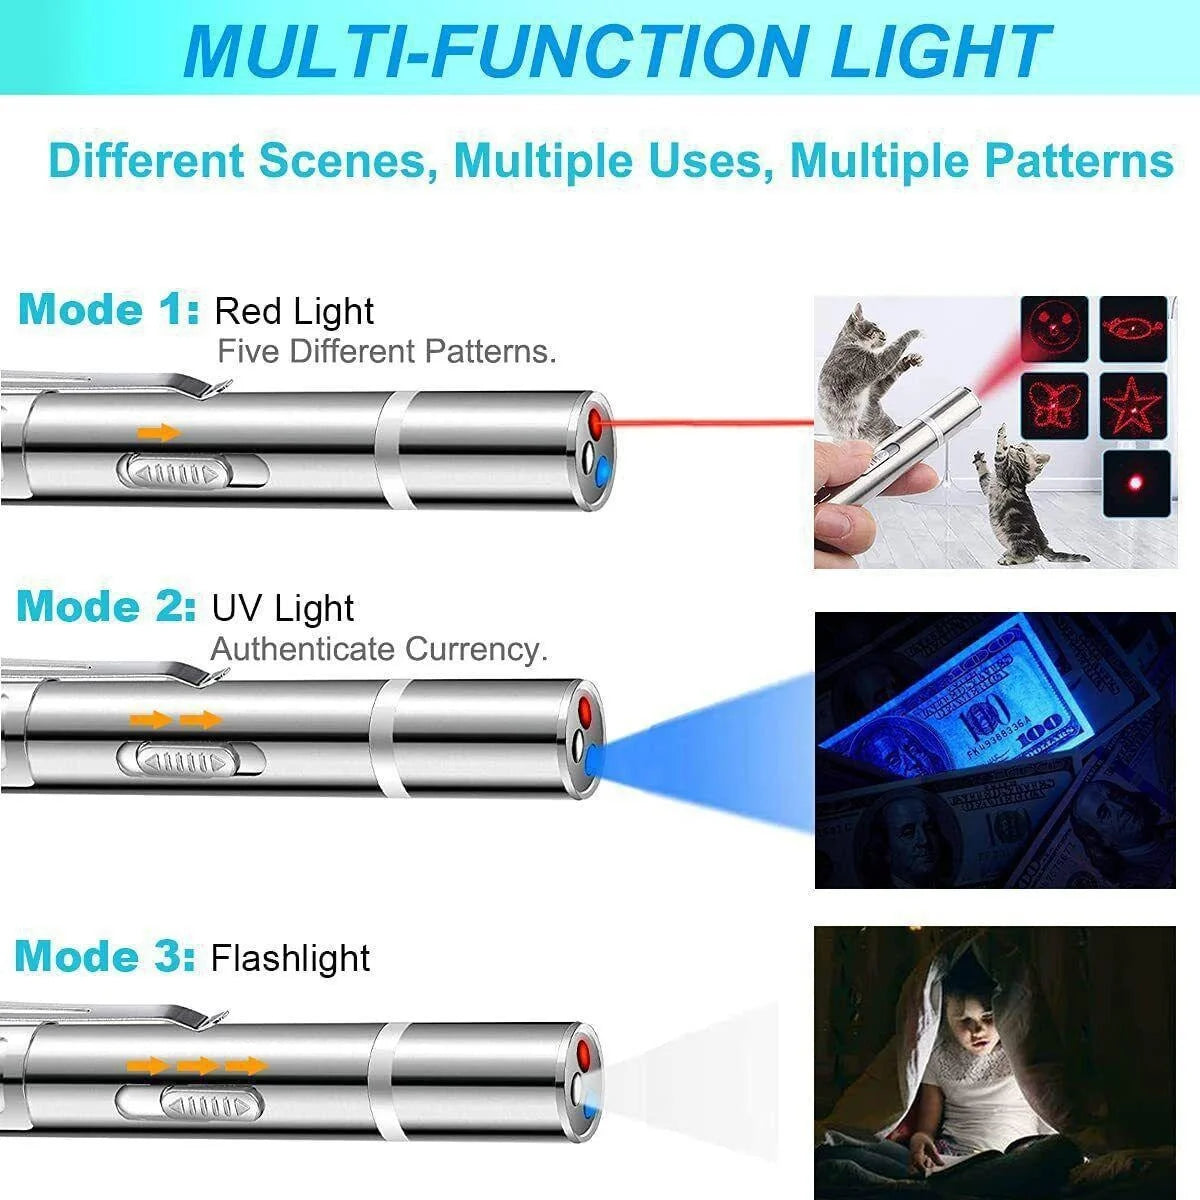 Cat Laser Toy 3 Mode Multiple Pattern Lazer Projection Pen Red Dot LED Light Pointer Interactive Cat Toys for Indoor Tease